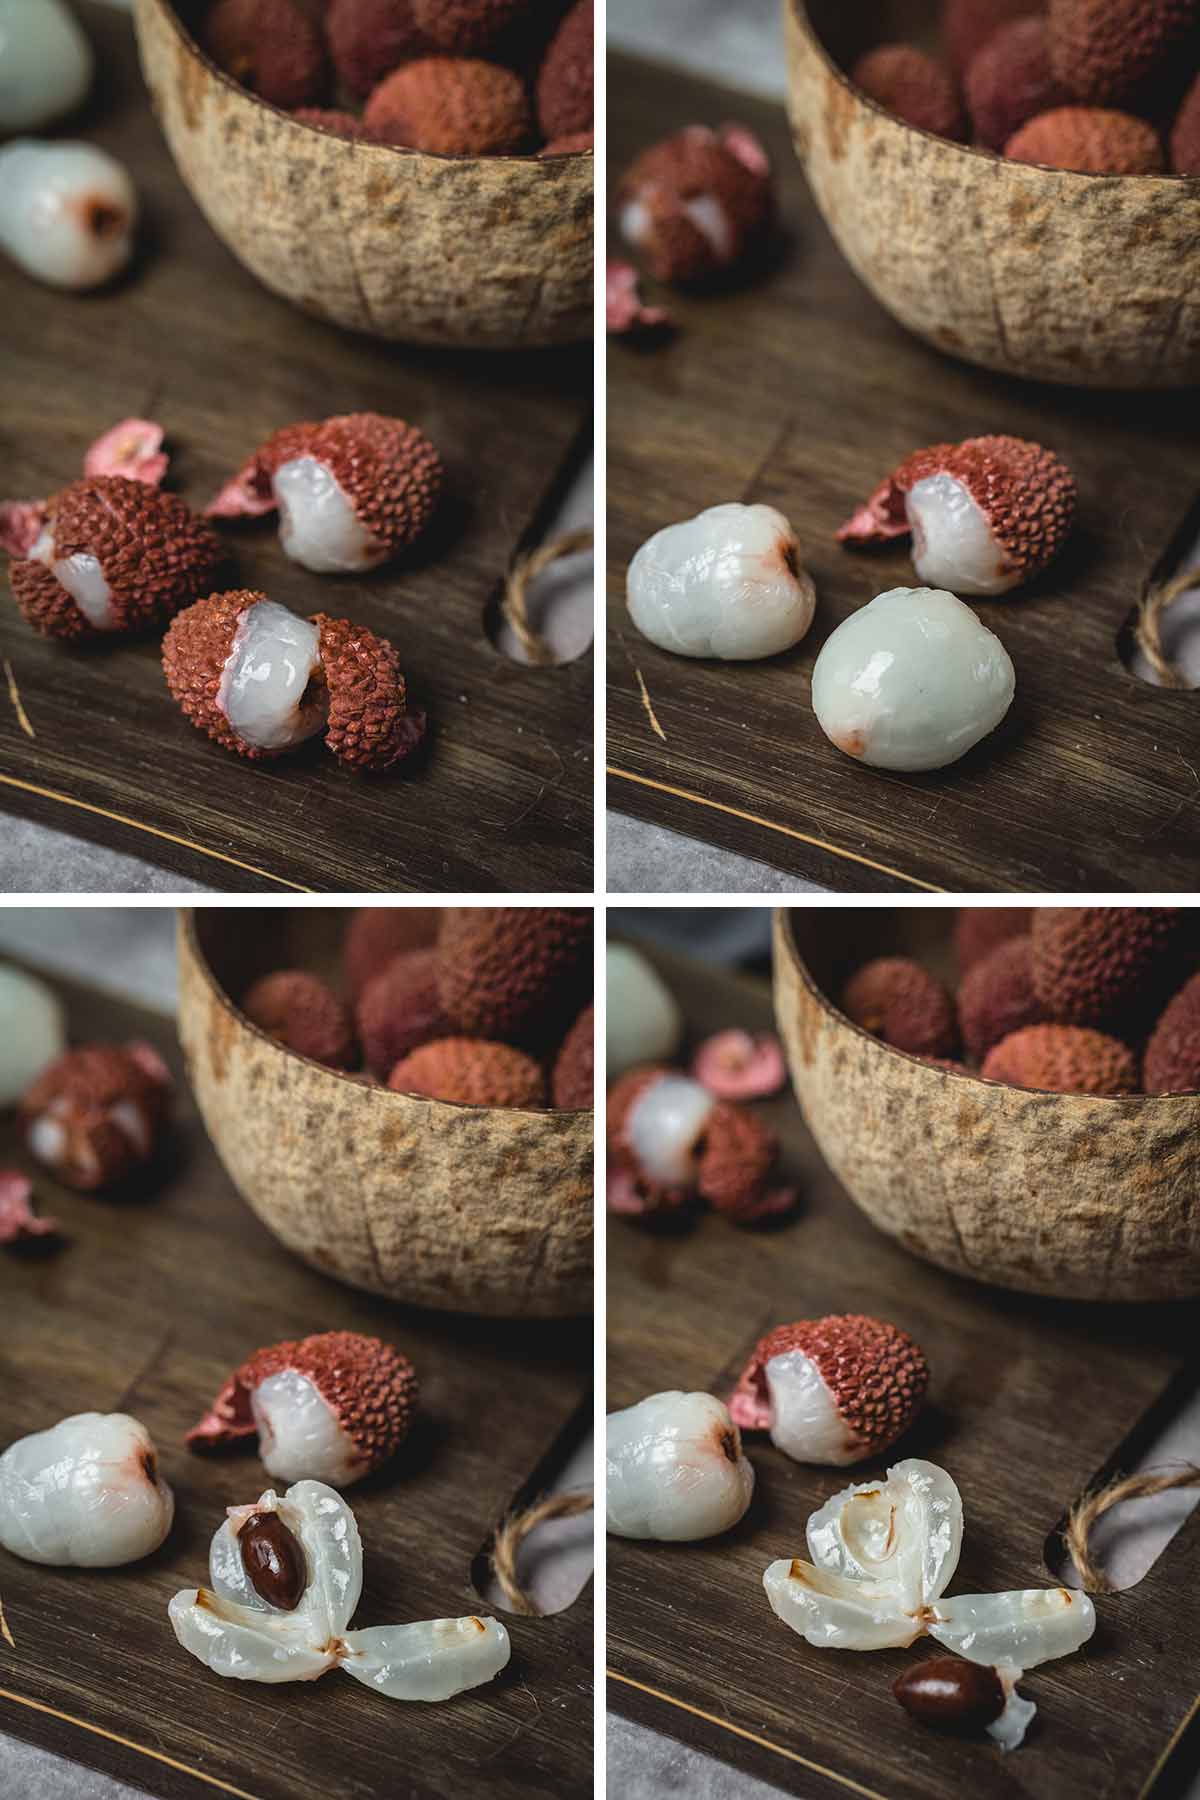 How to Eat a Lychee